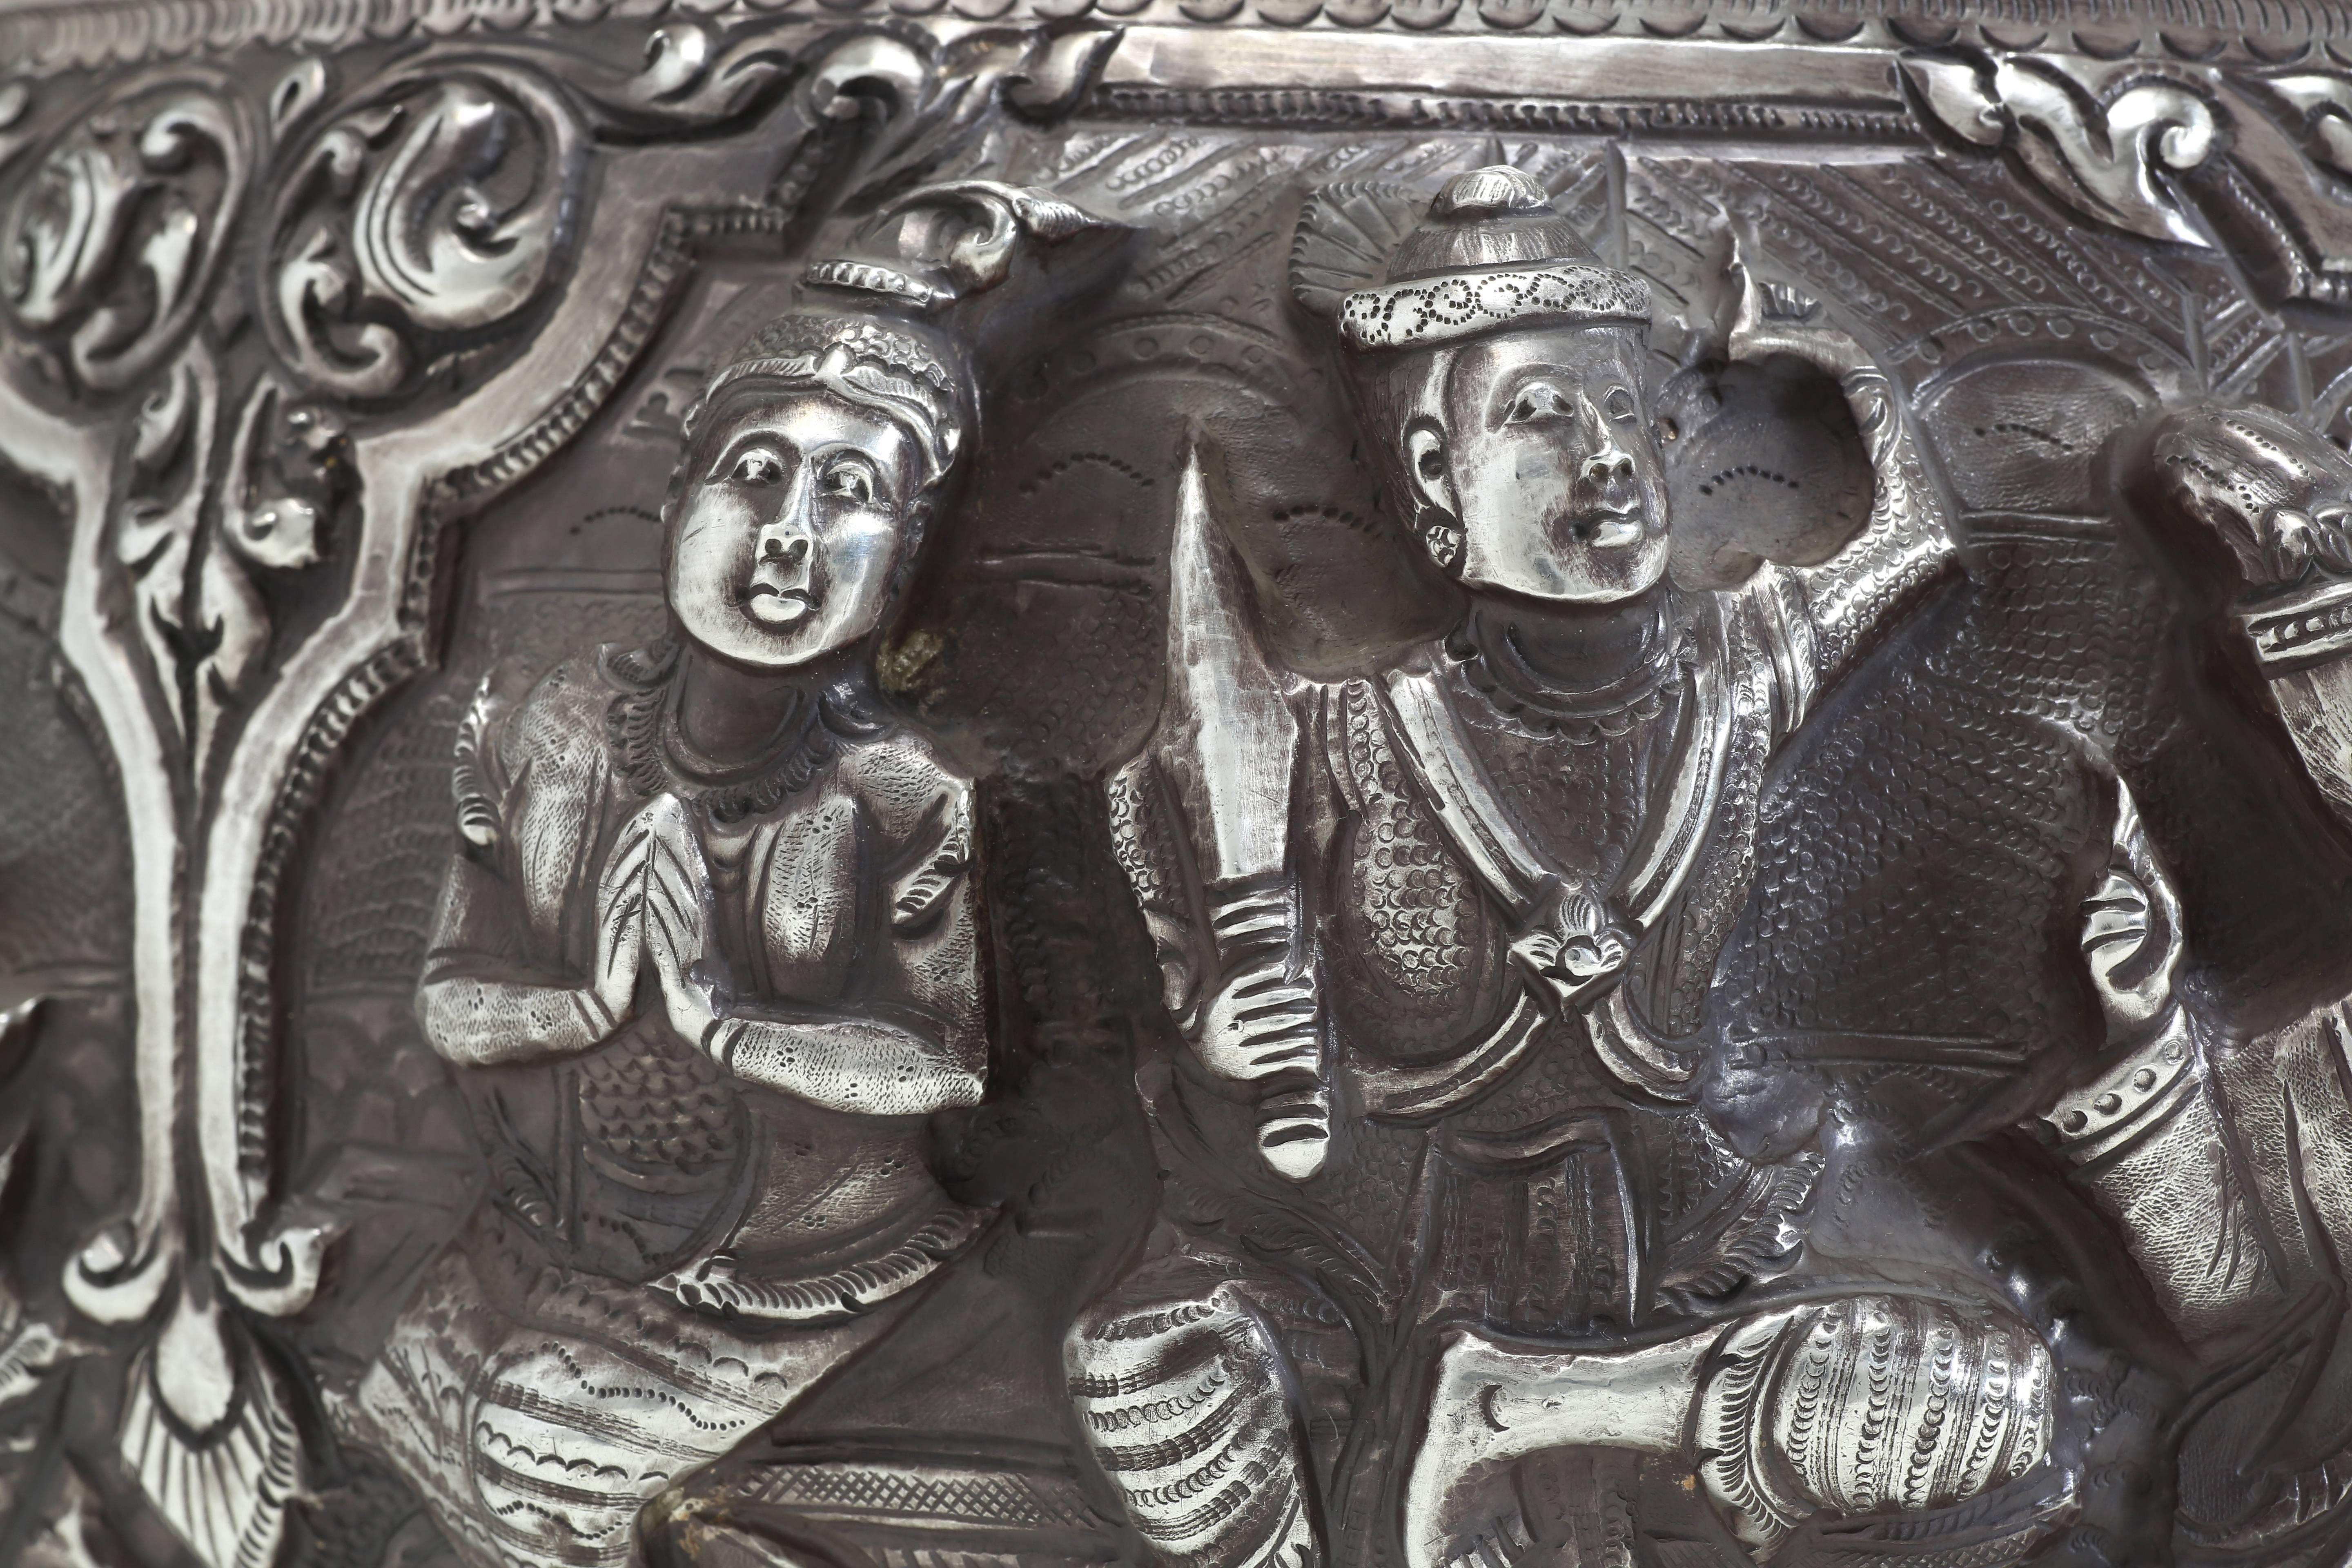 Hand-Crafted Old Solid Silver Hand-Worked Burmese Ceremonial Bowl, High-Relief Jataka Scenes